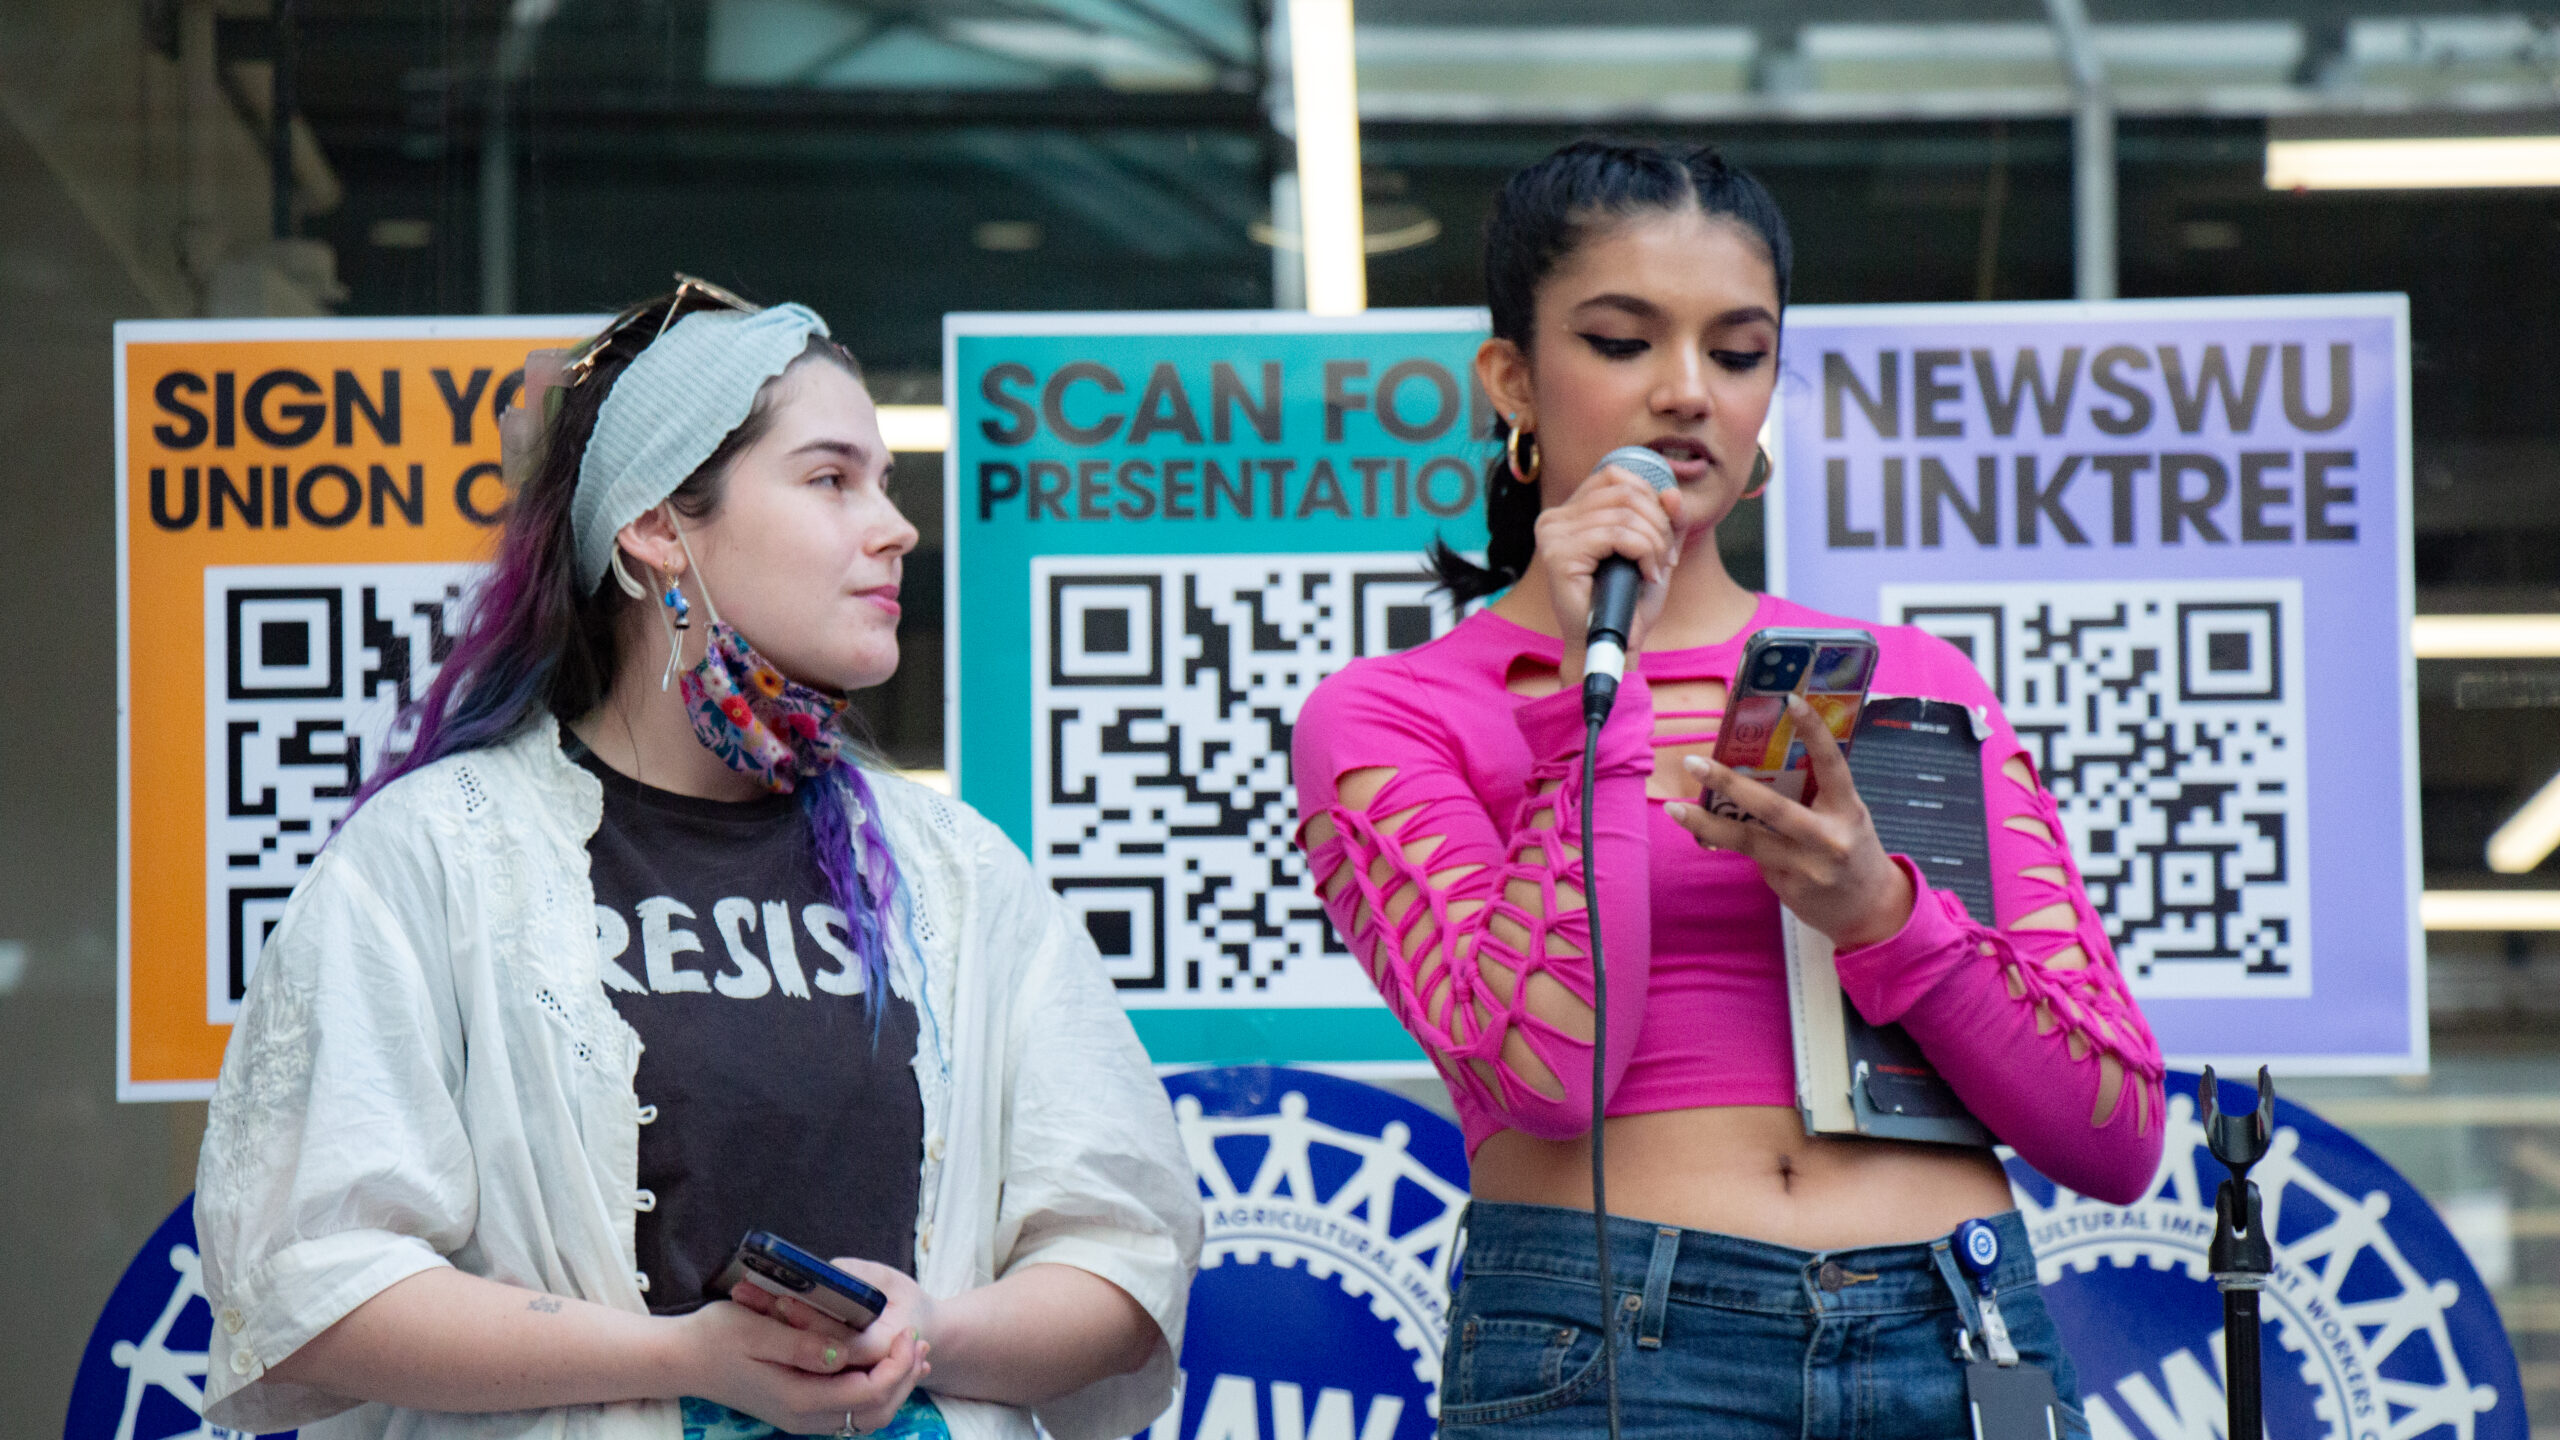 Two people, the one on the right holding a microphone, stand in front of three large, brightly colored signs with QR codes hung to a glass building wall. The first sign reads “Sign Your Union Card.” The second sign reads “Scan for Presentation.” The third sign reads “NewSWU Linktree.”